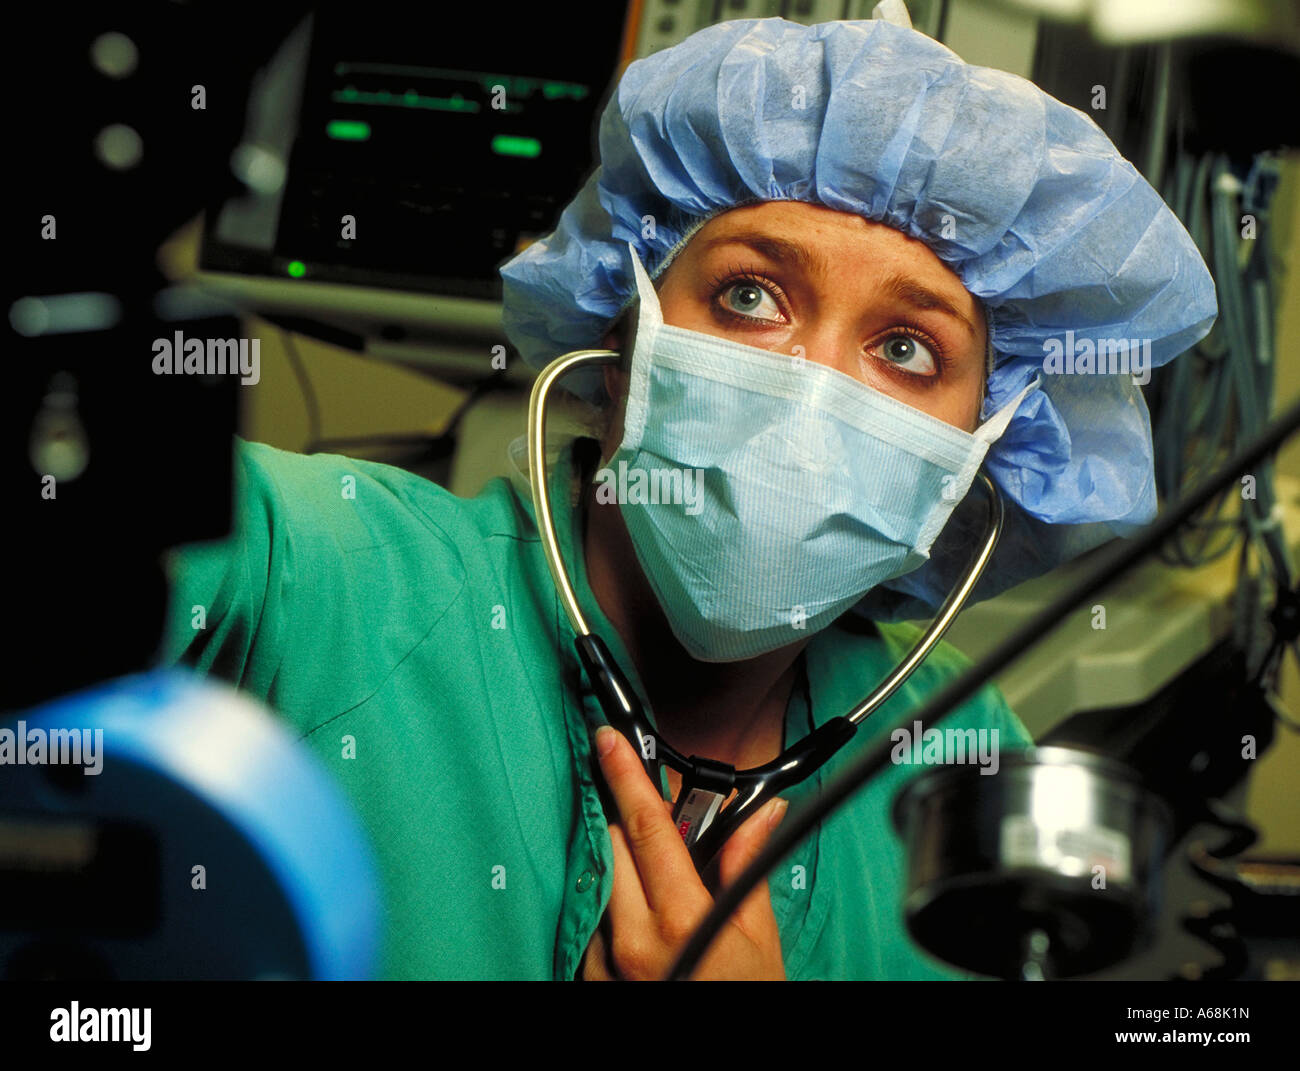 Anesthesiologist monitors a surgical patient Stock Photo